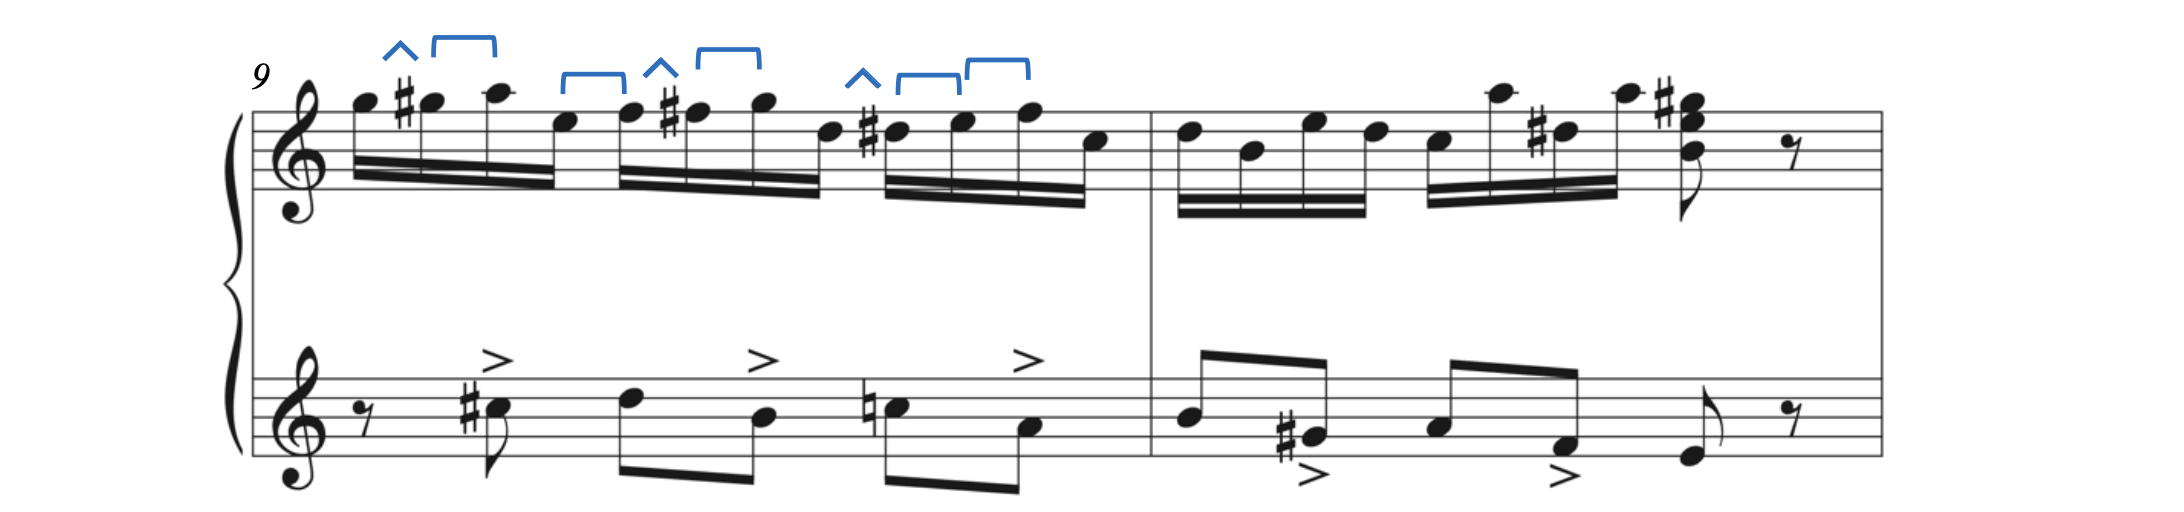 Examples of chromatic and diatonic half steps in Szymanowska's Dance No. 2, Trio. There is a chromatic half step from G to G-sharp, a diatonic half step from G-sharp to A, and diatonic half step from E to F, a chromatic half step from F to F-sharp, a diatonic half step from F-sharp to G, a chromatic half step from D to D-sharp, a diatonic half step between D-sharp and E, and a diatonic half step between E and F.